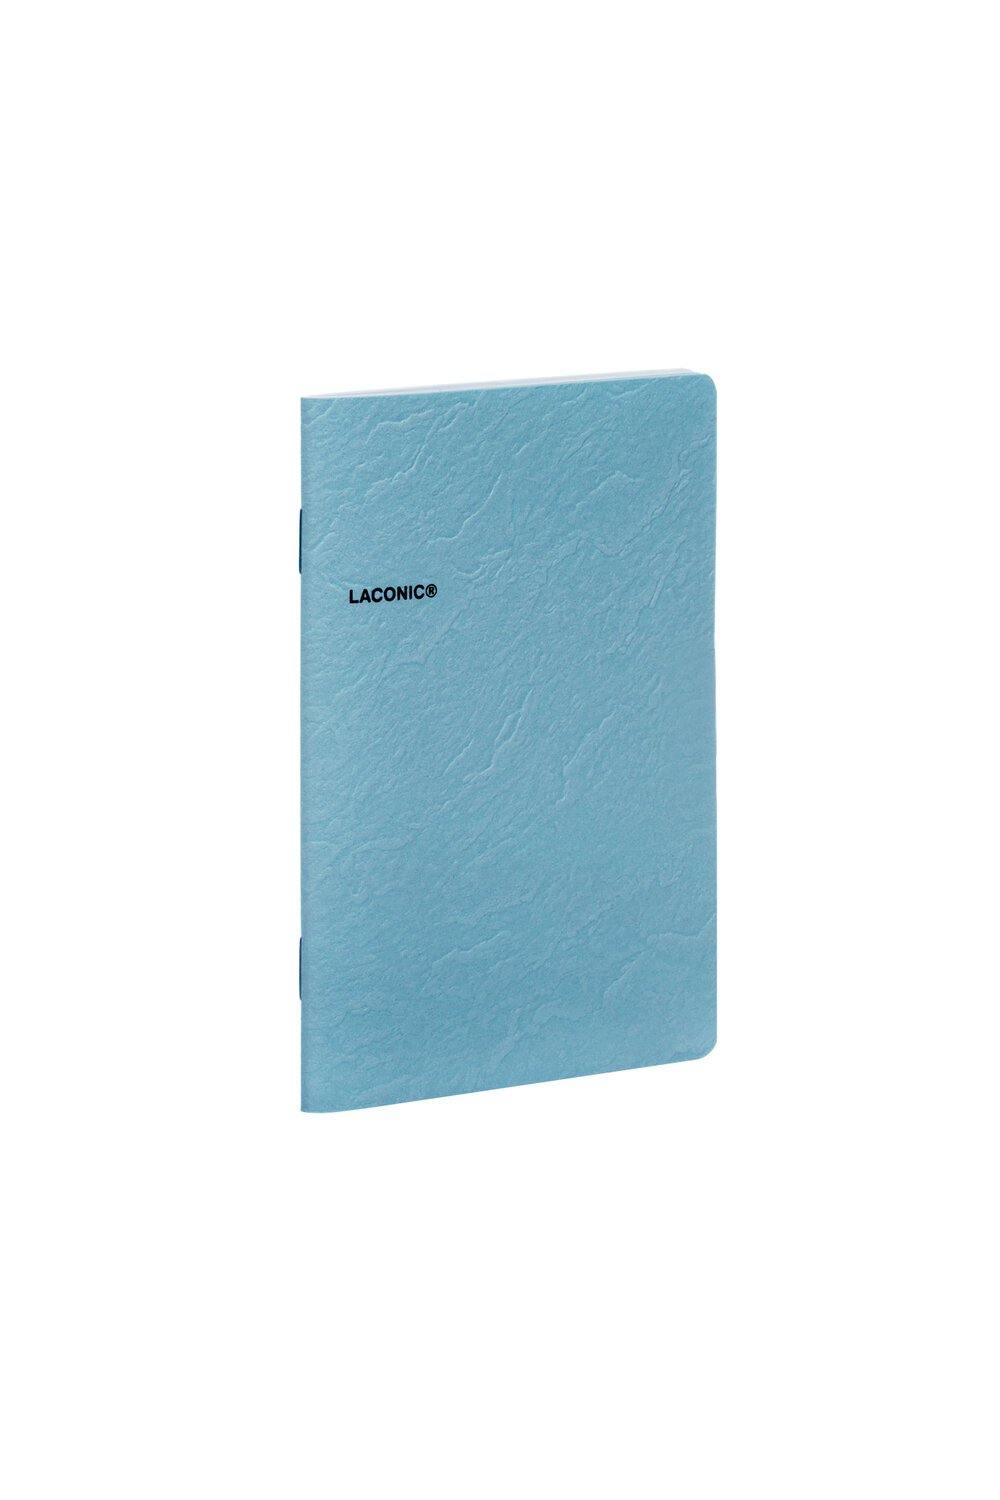 Cliff Notebook - Lined